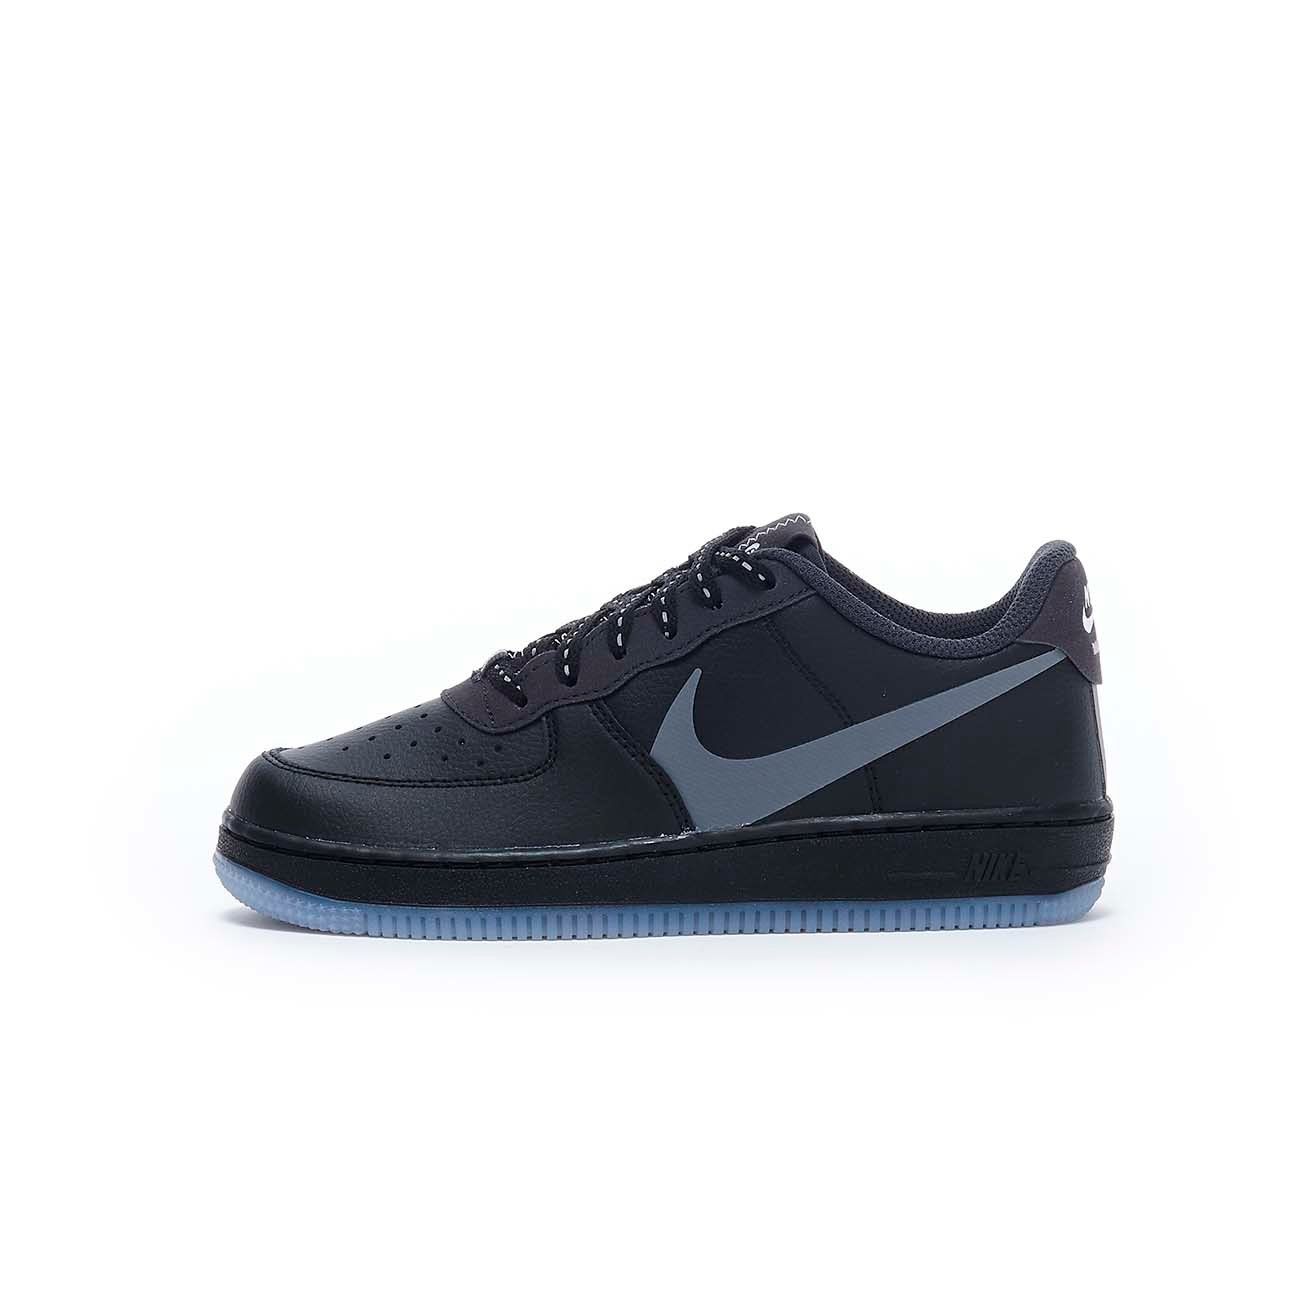 Nike Air Force 1 '07 LV8 3 (Black/Silver Lilac-Anthracite